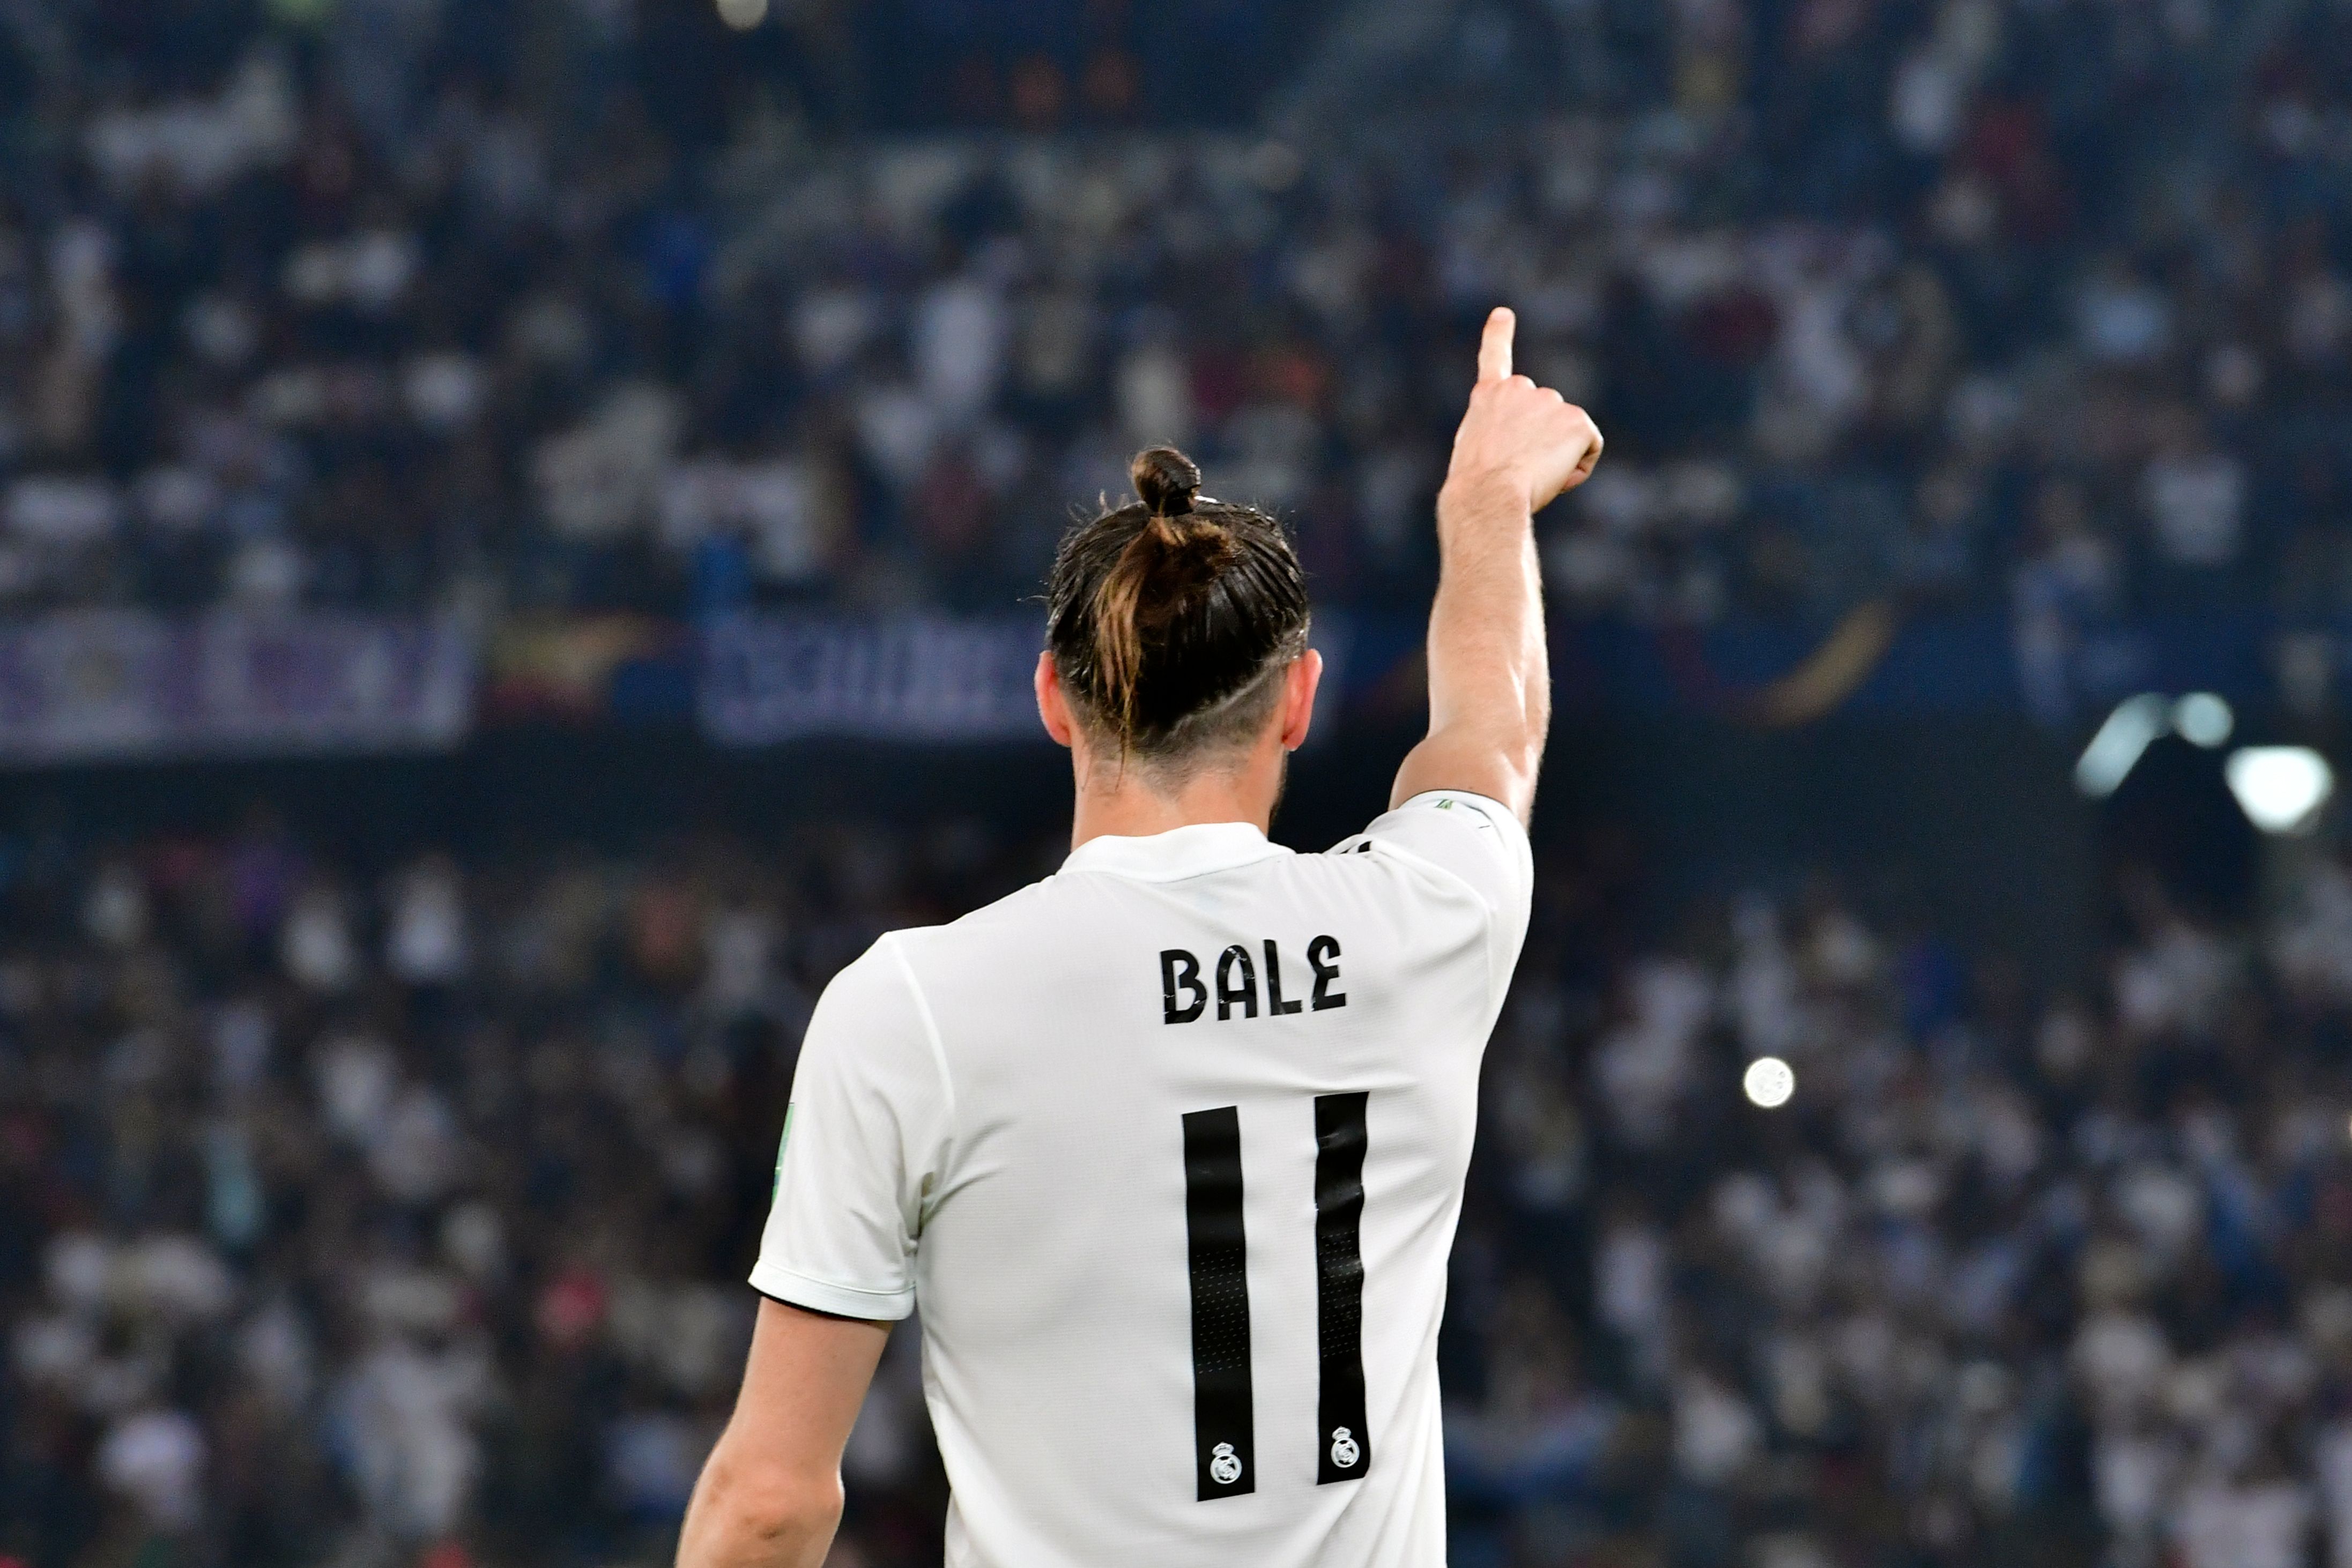 Will Bale create history on Saturday? (Photo by Giuseppe Cacace/AFP/Getty Images)